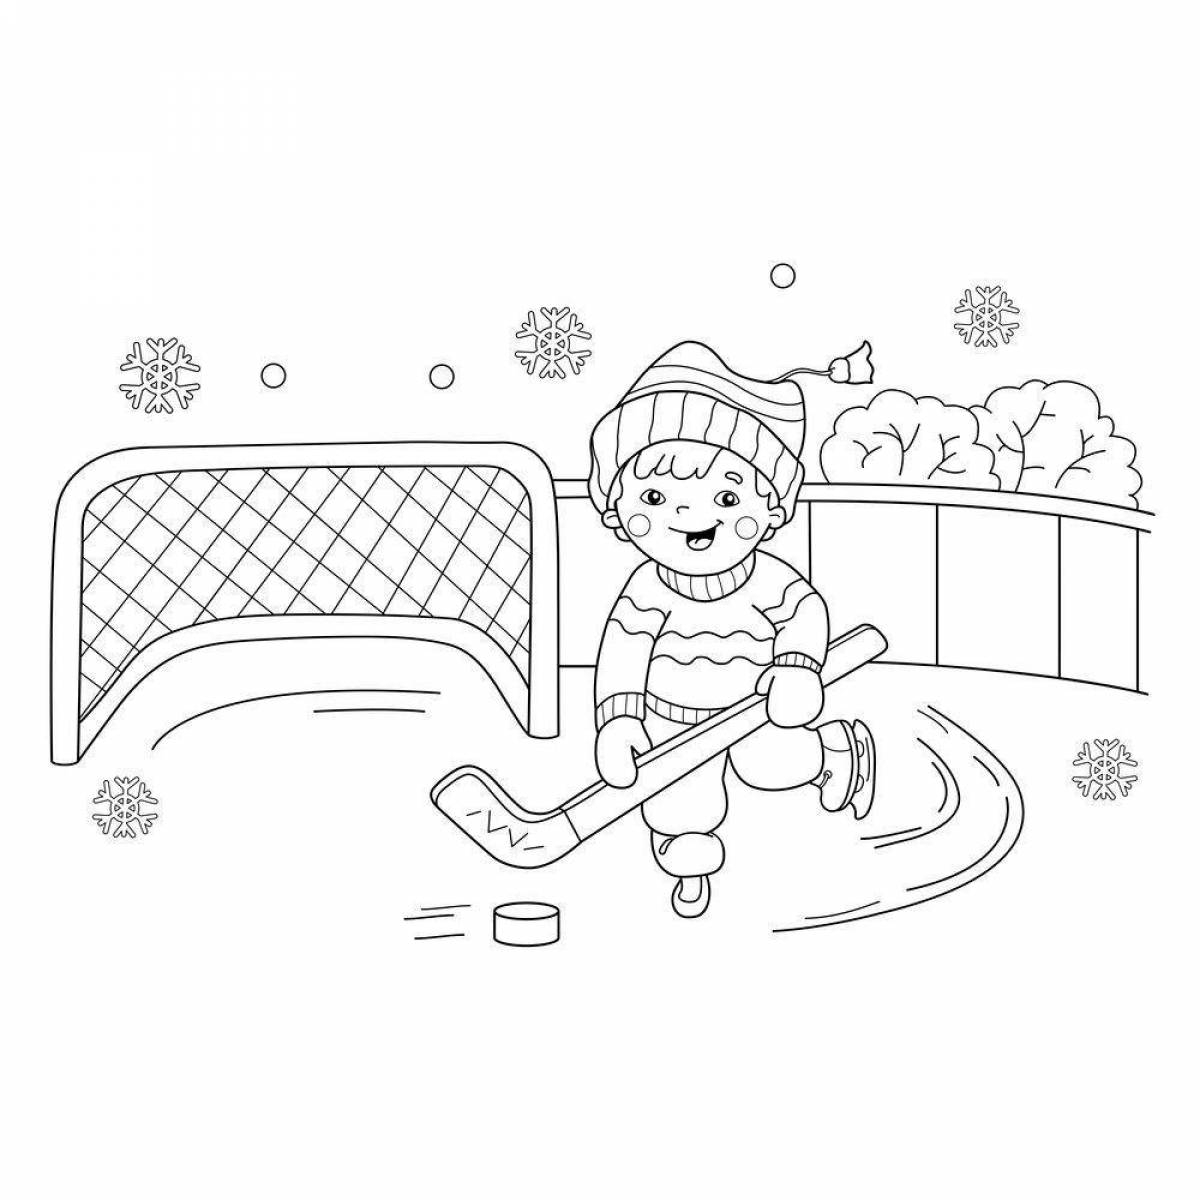 Adorable winter sports coloring book for 6-7 year olds